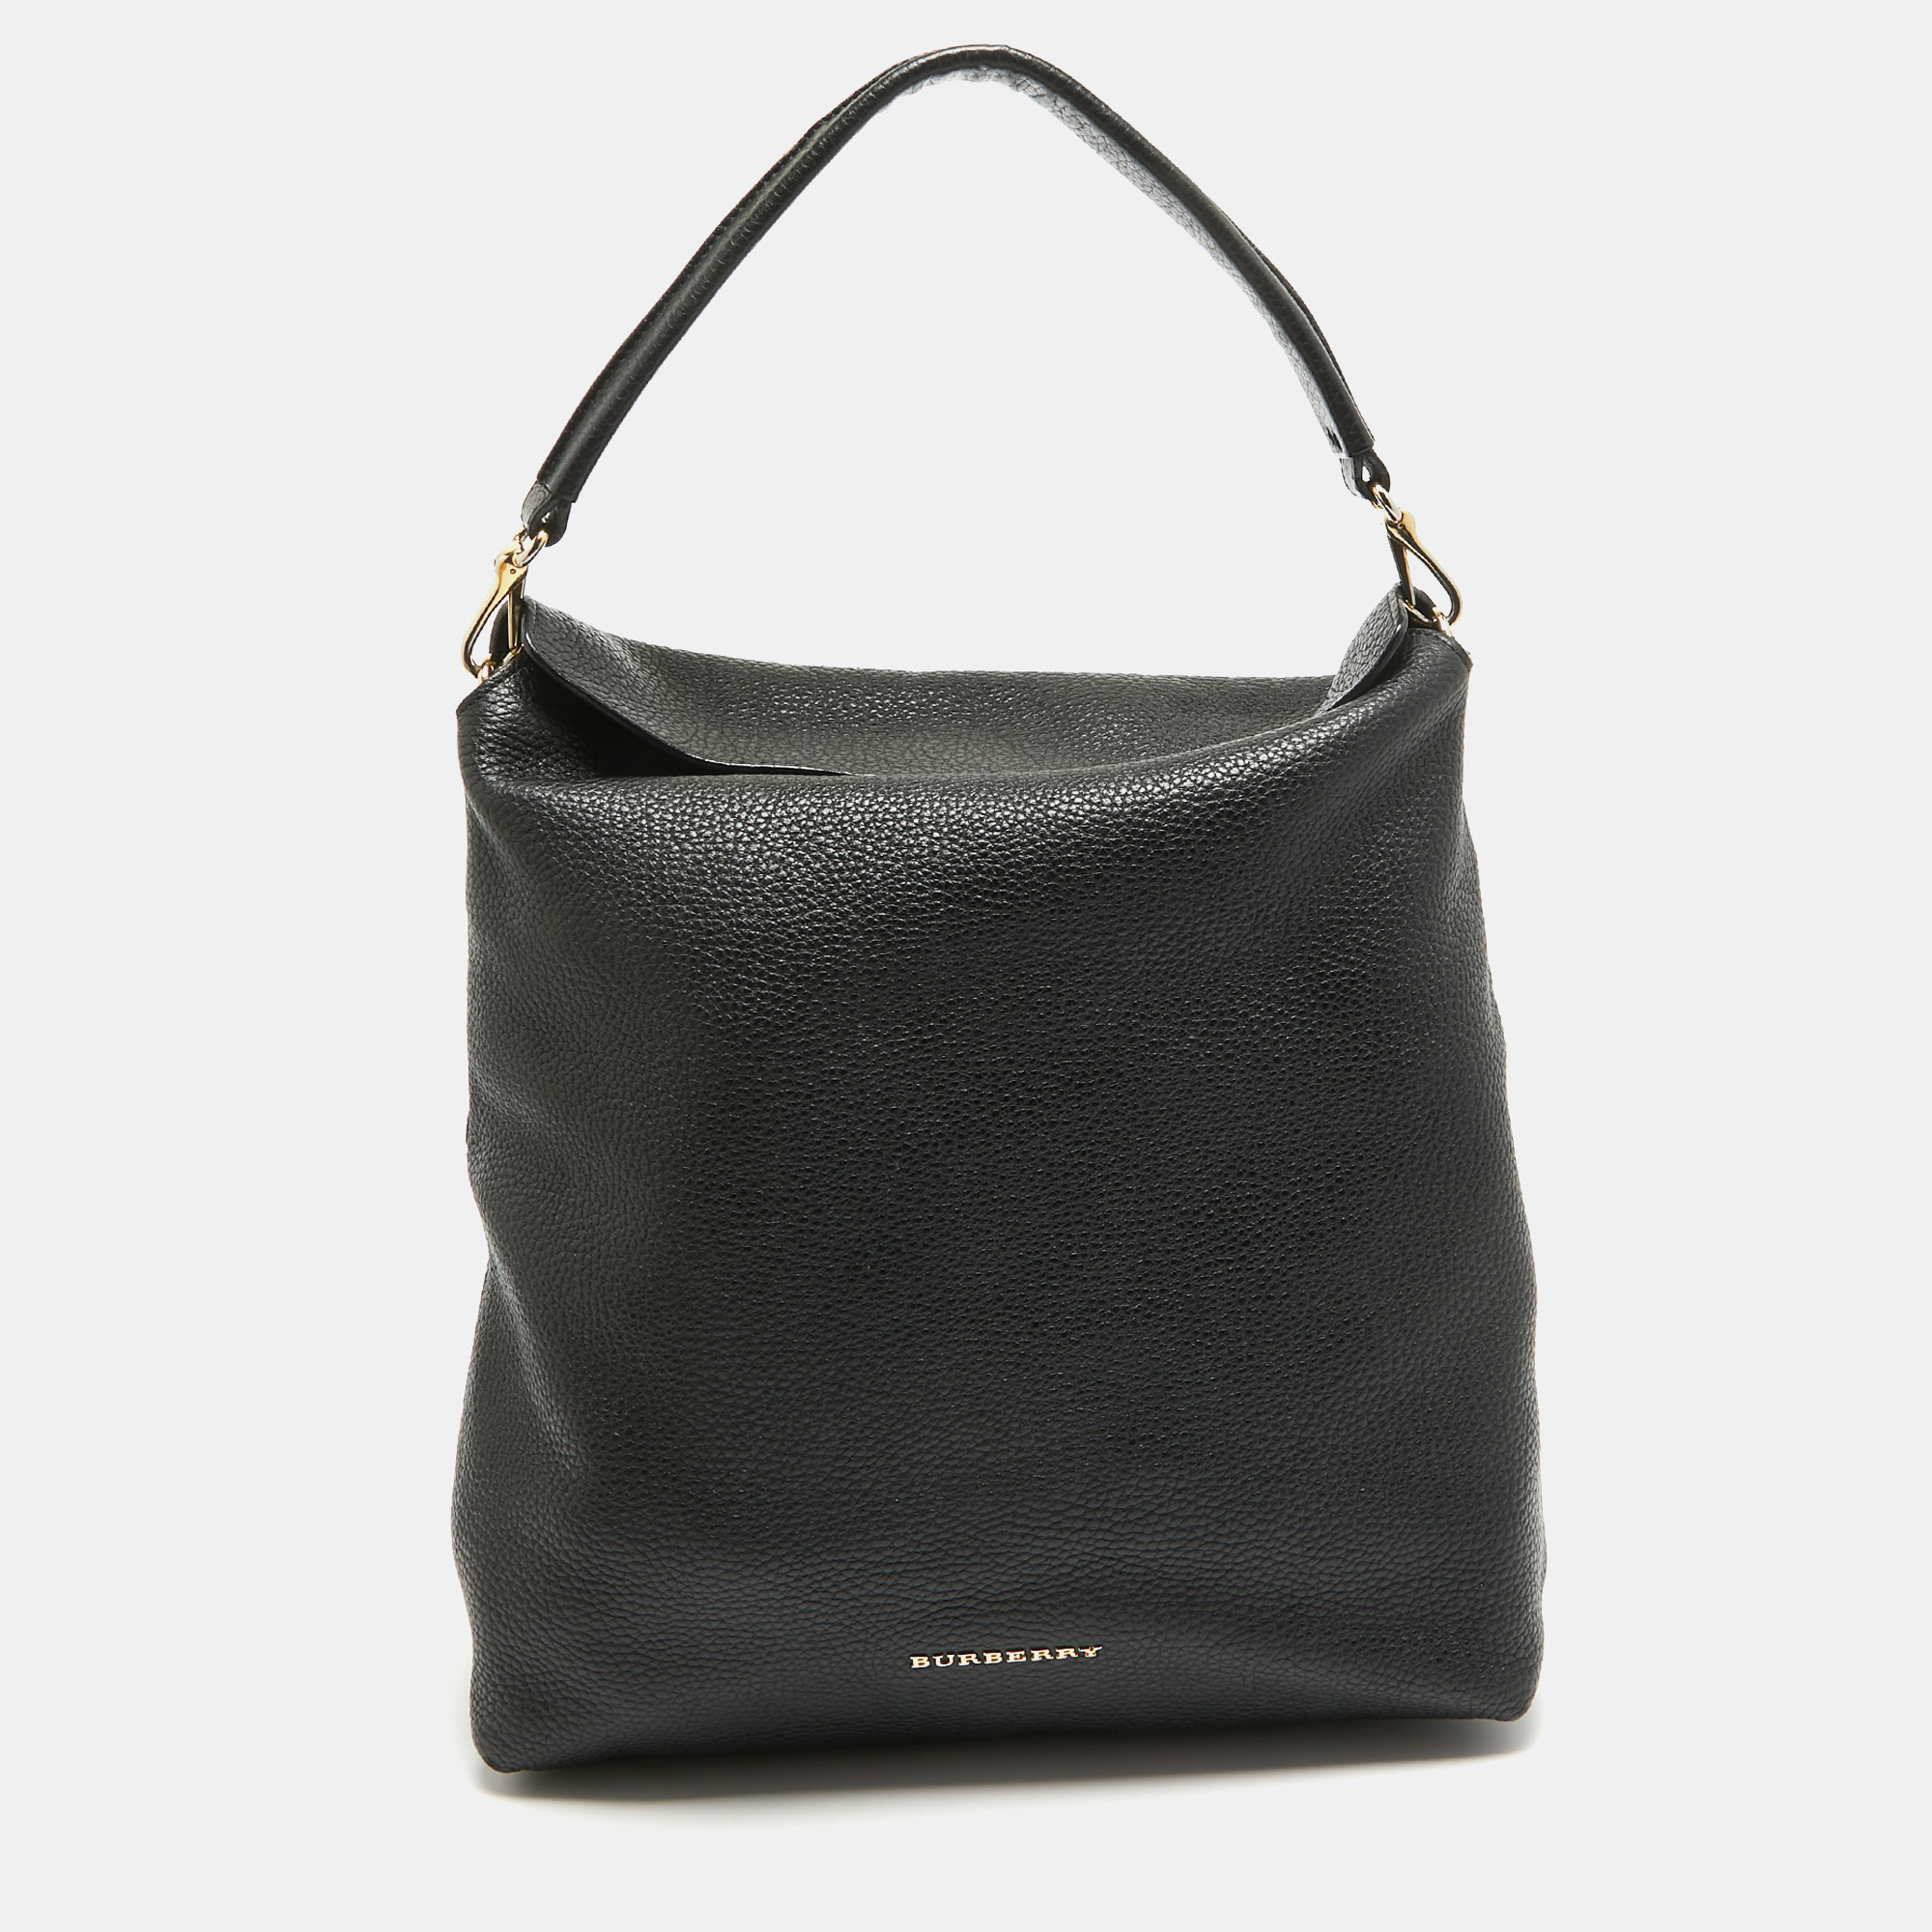 

Burberry Black Leather Cale Hobo